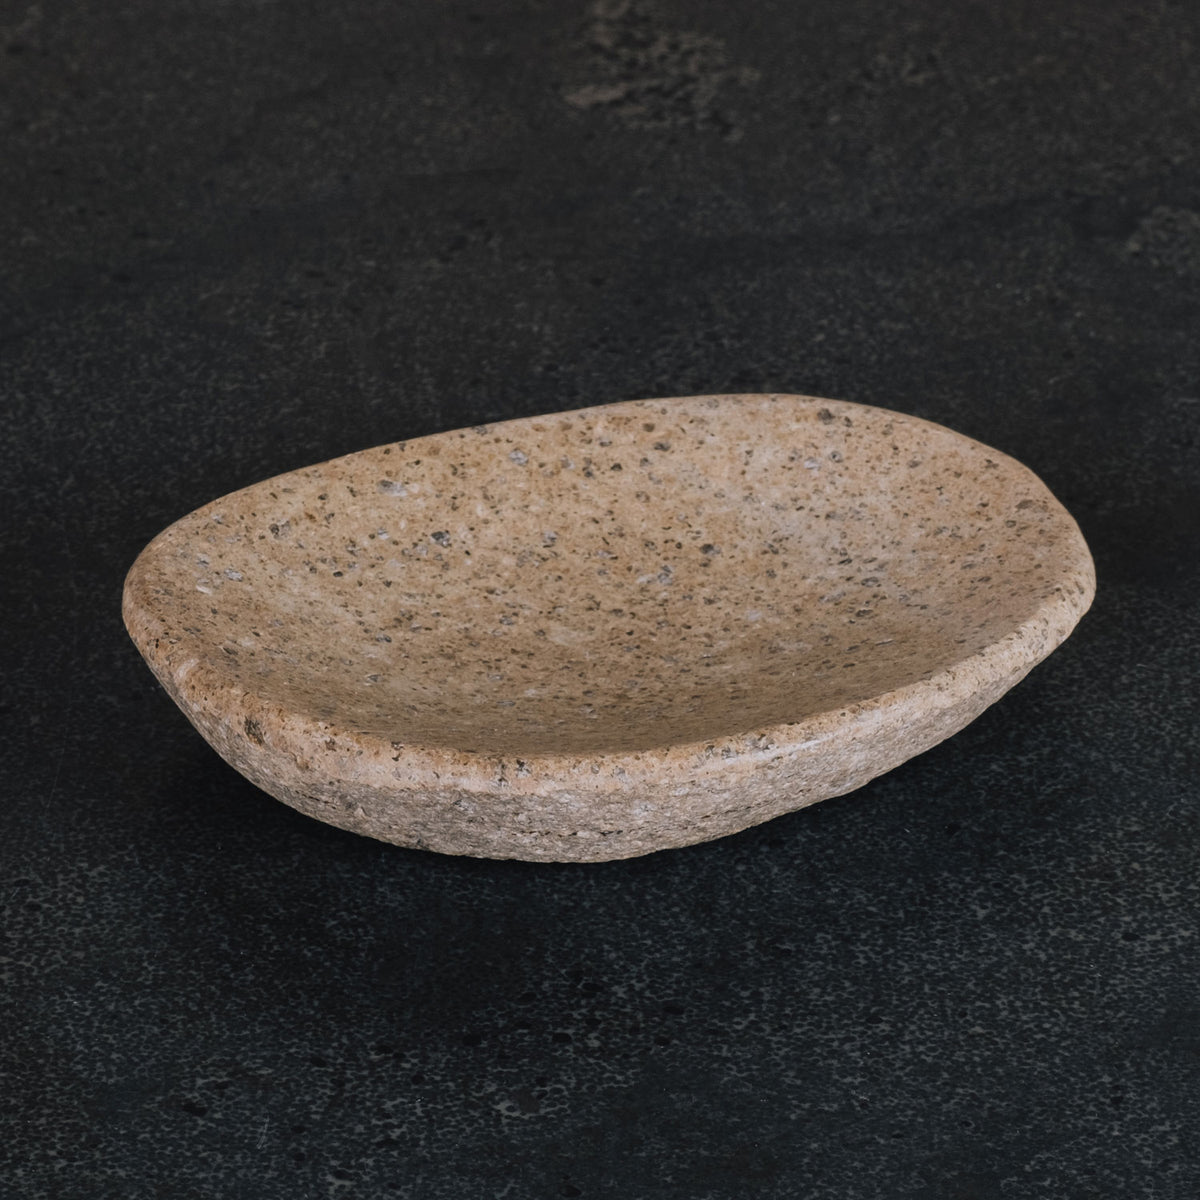 Stone Forest Natural stone soap dish is approximately 7